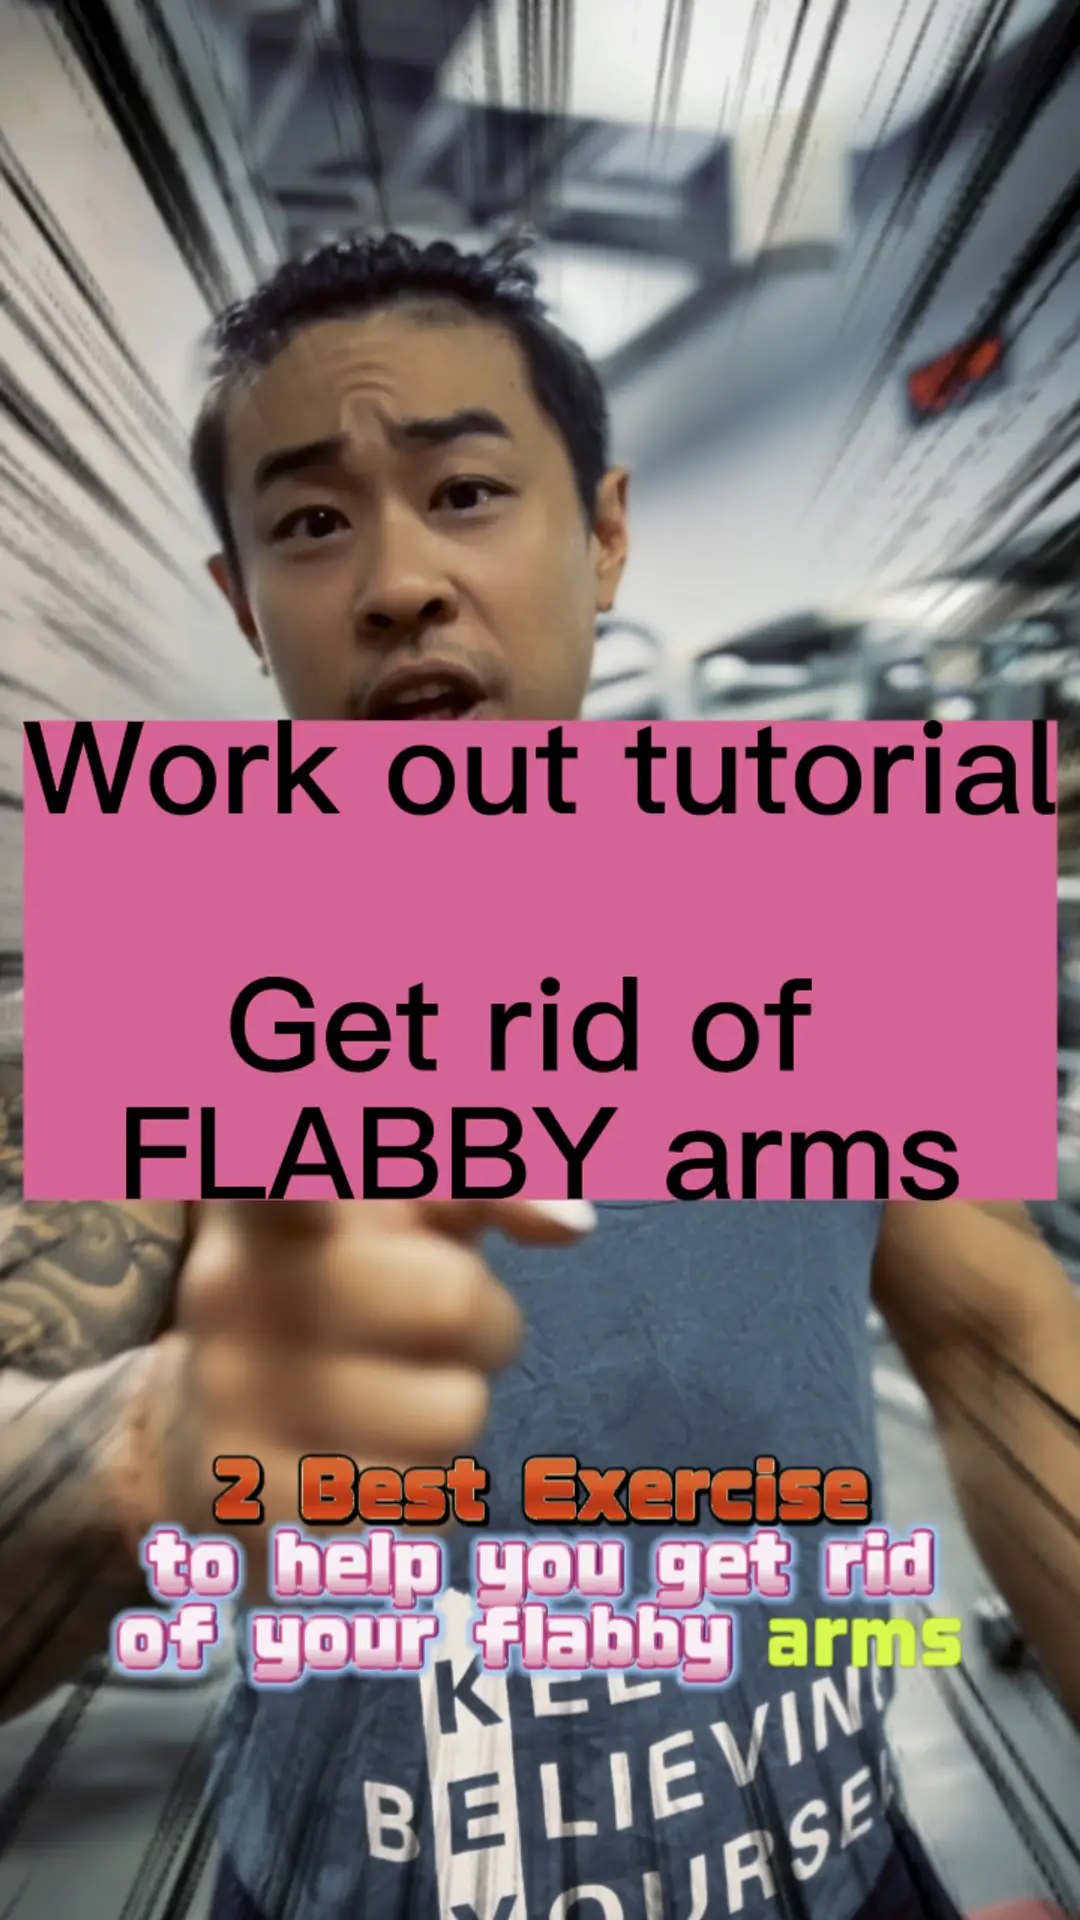 2 best exercise to help u get rid of flabby arms, Video published by  SG-Sky